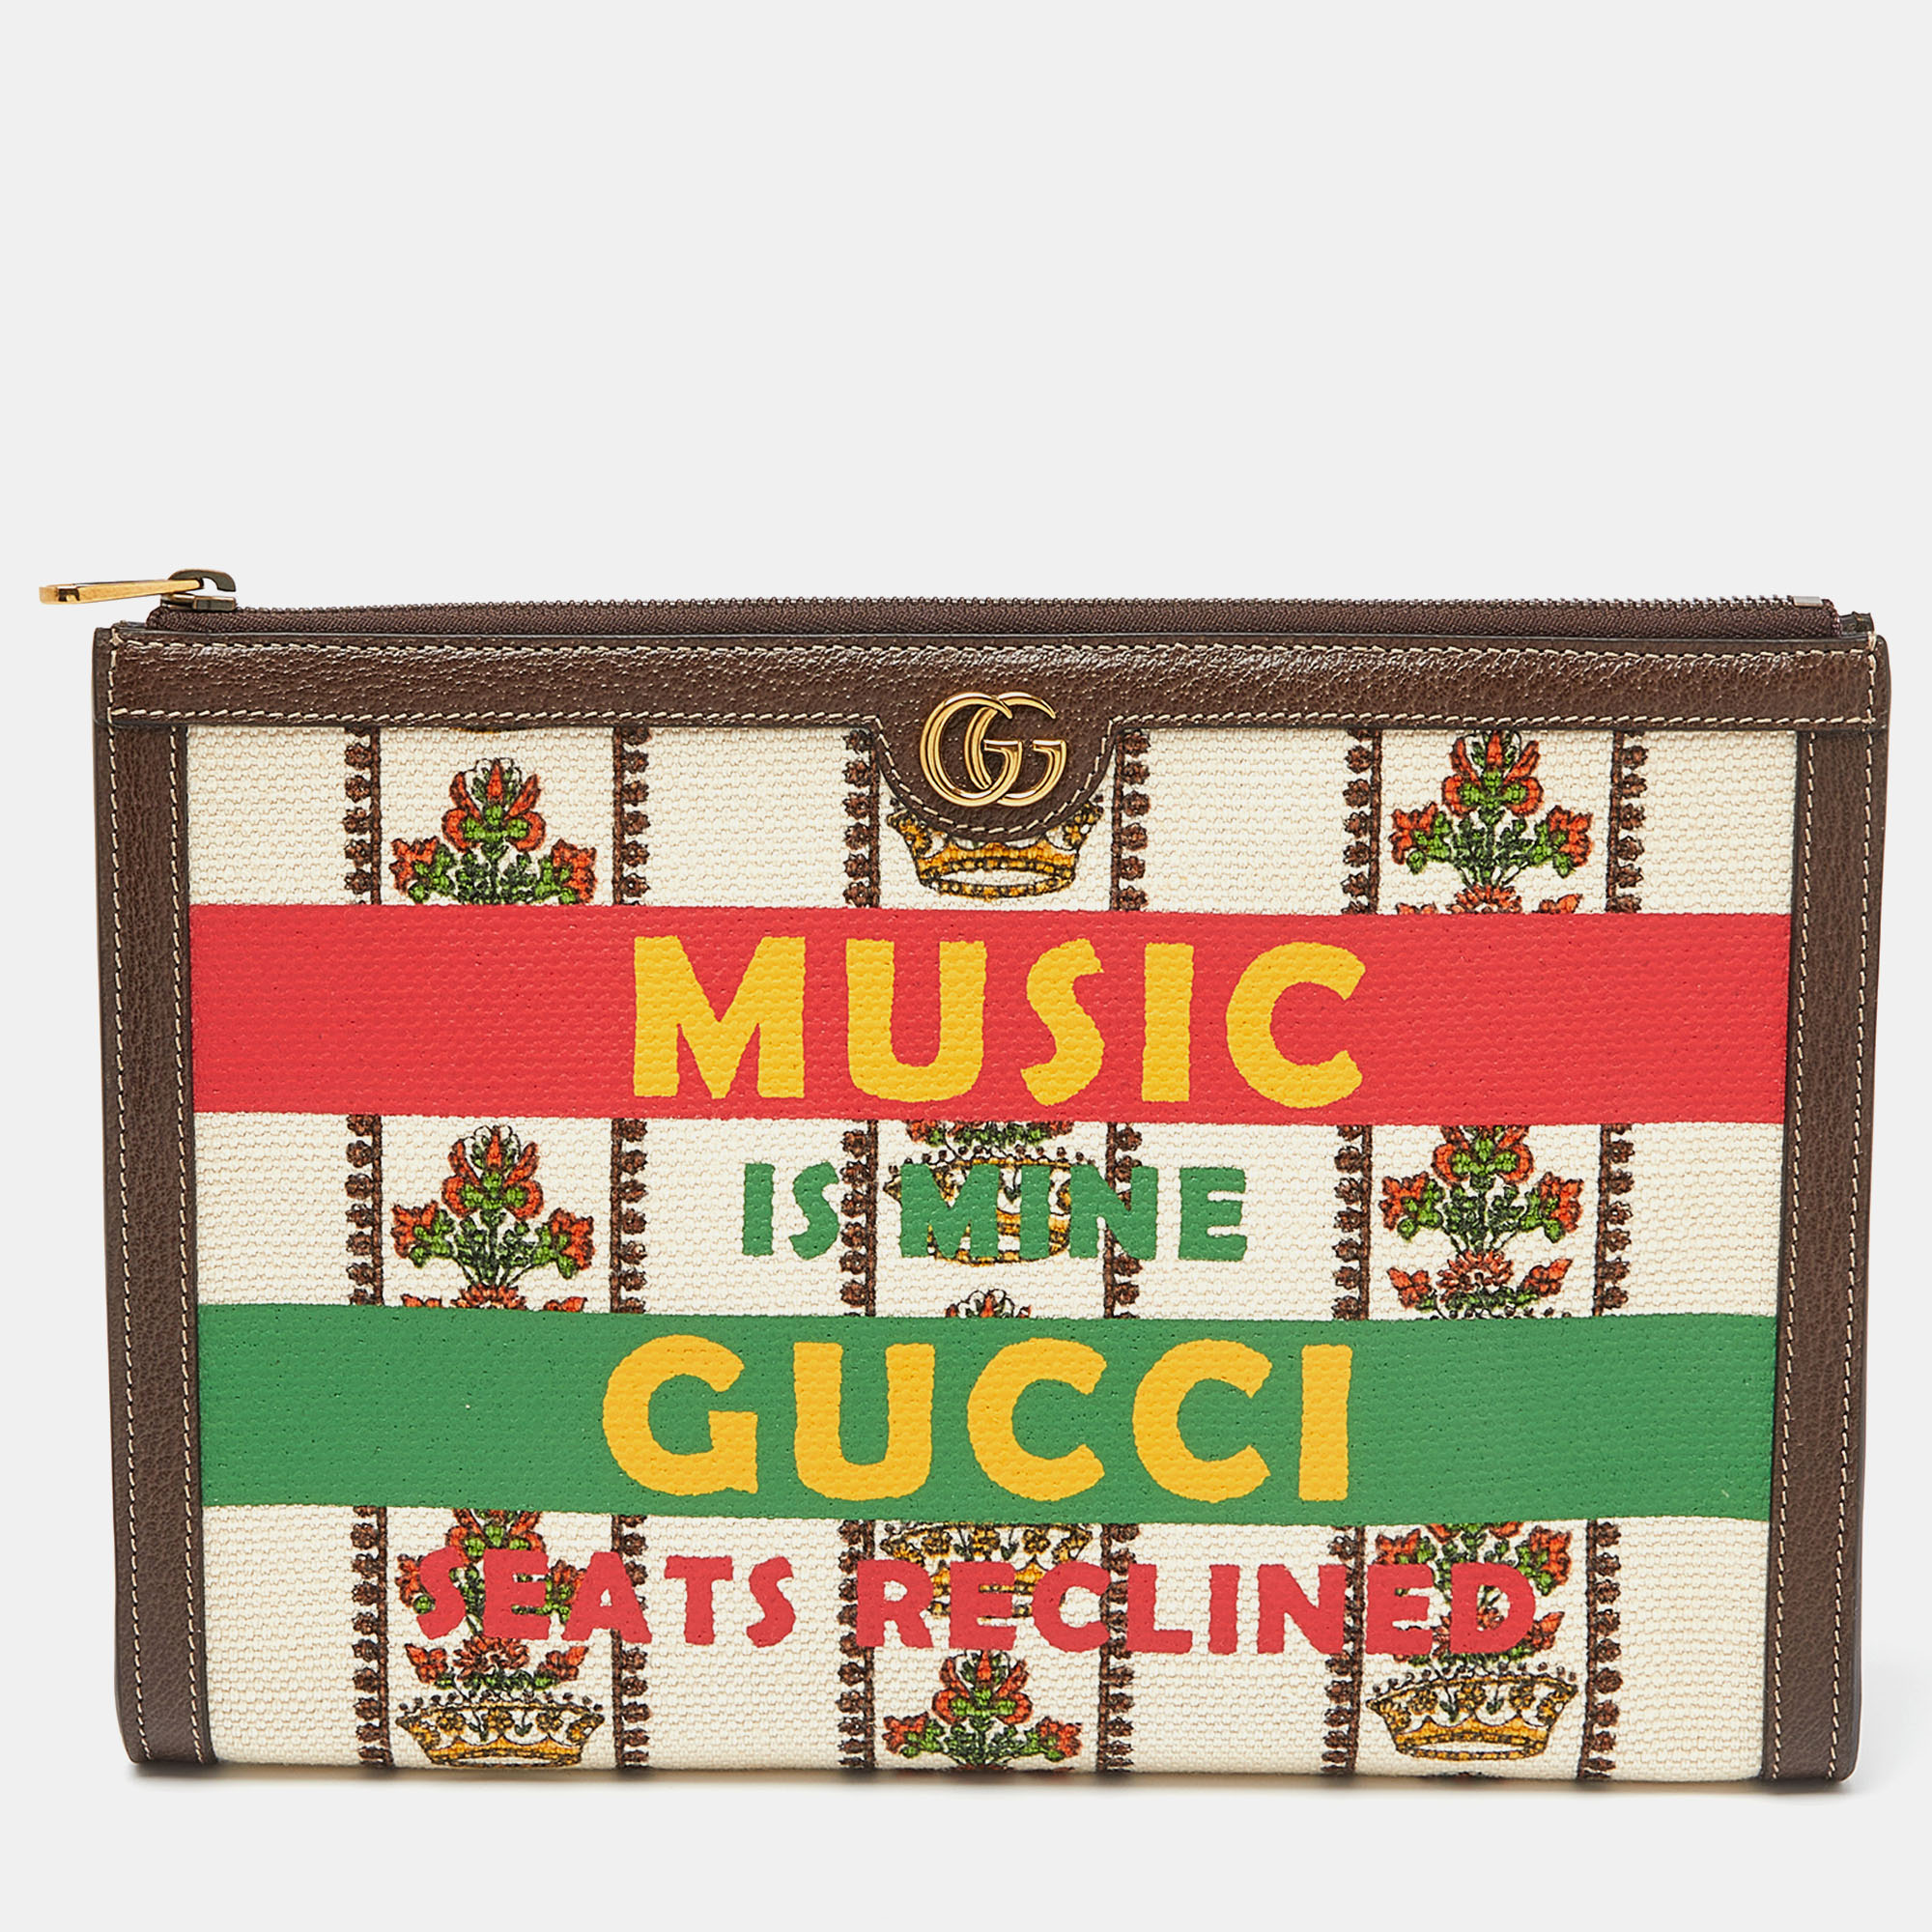 Gucci multicolor canvas and leather "music is mine" zip pouch